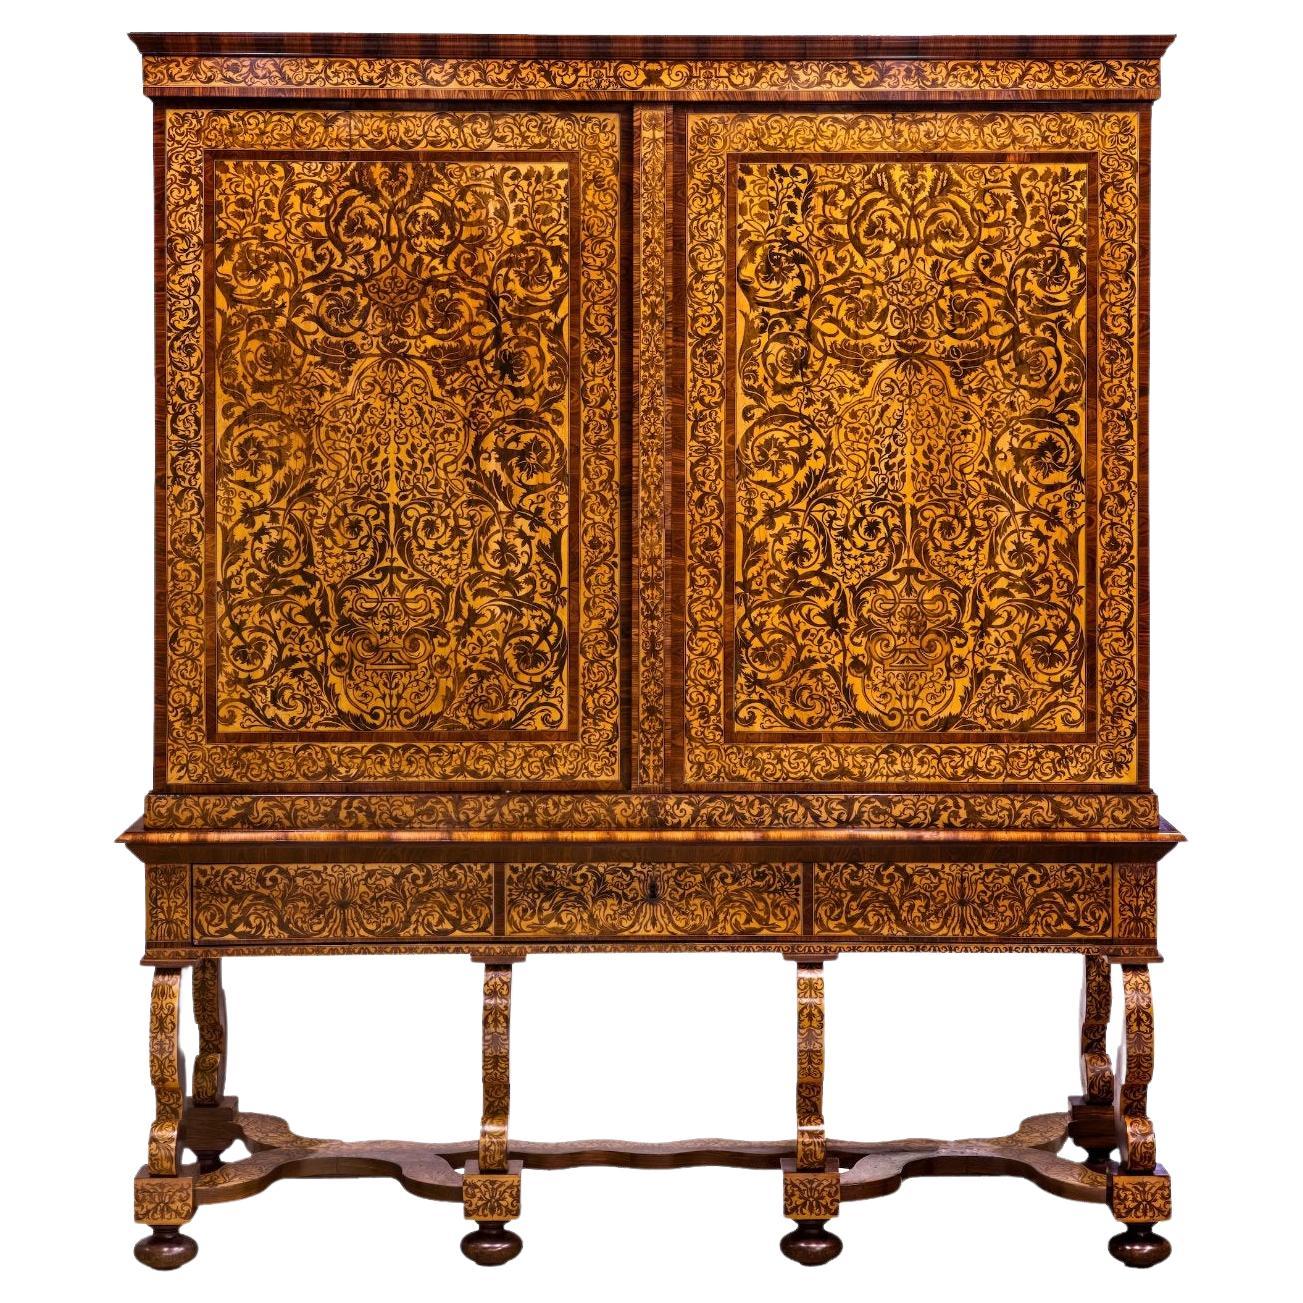 A magnificent Dutch marquetry cabinet on stand, by Jan van Mekeren (1658-1733)  For Sale